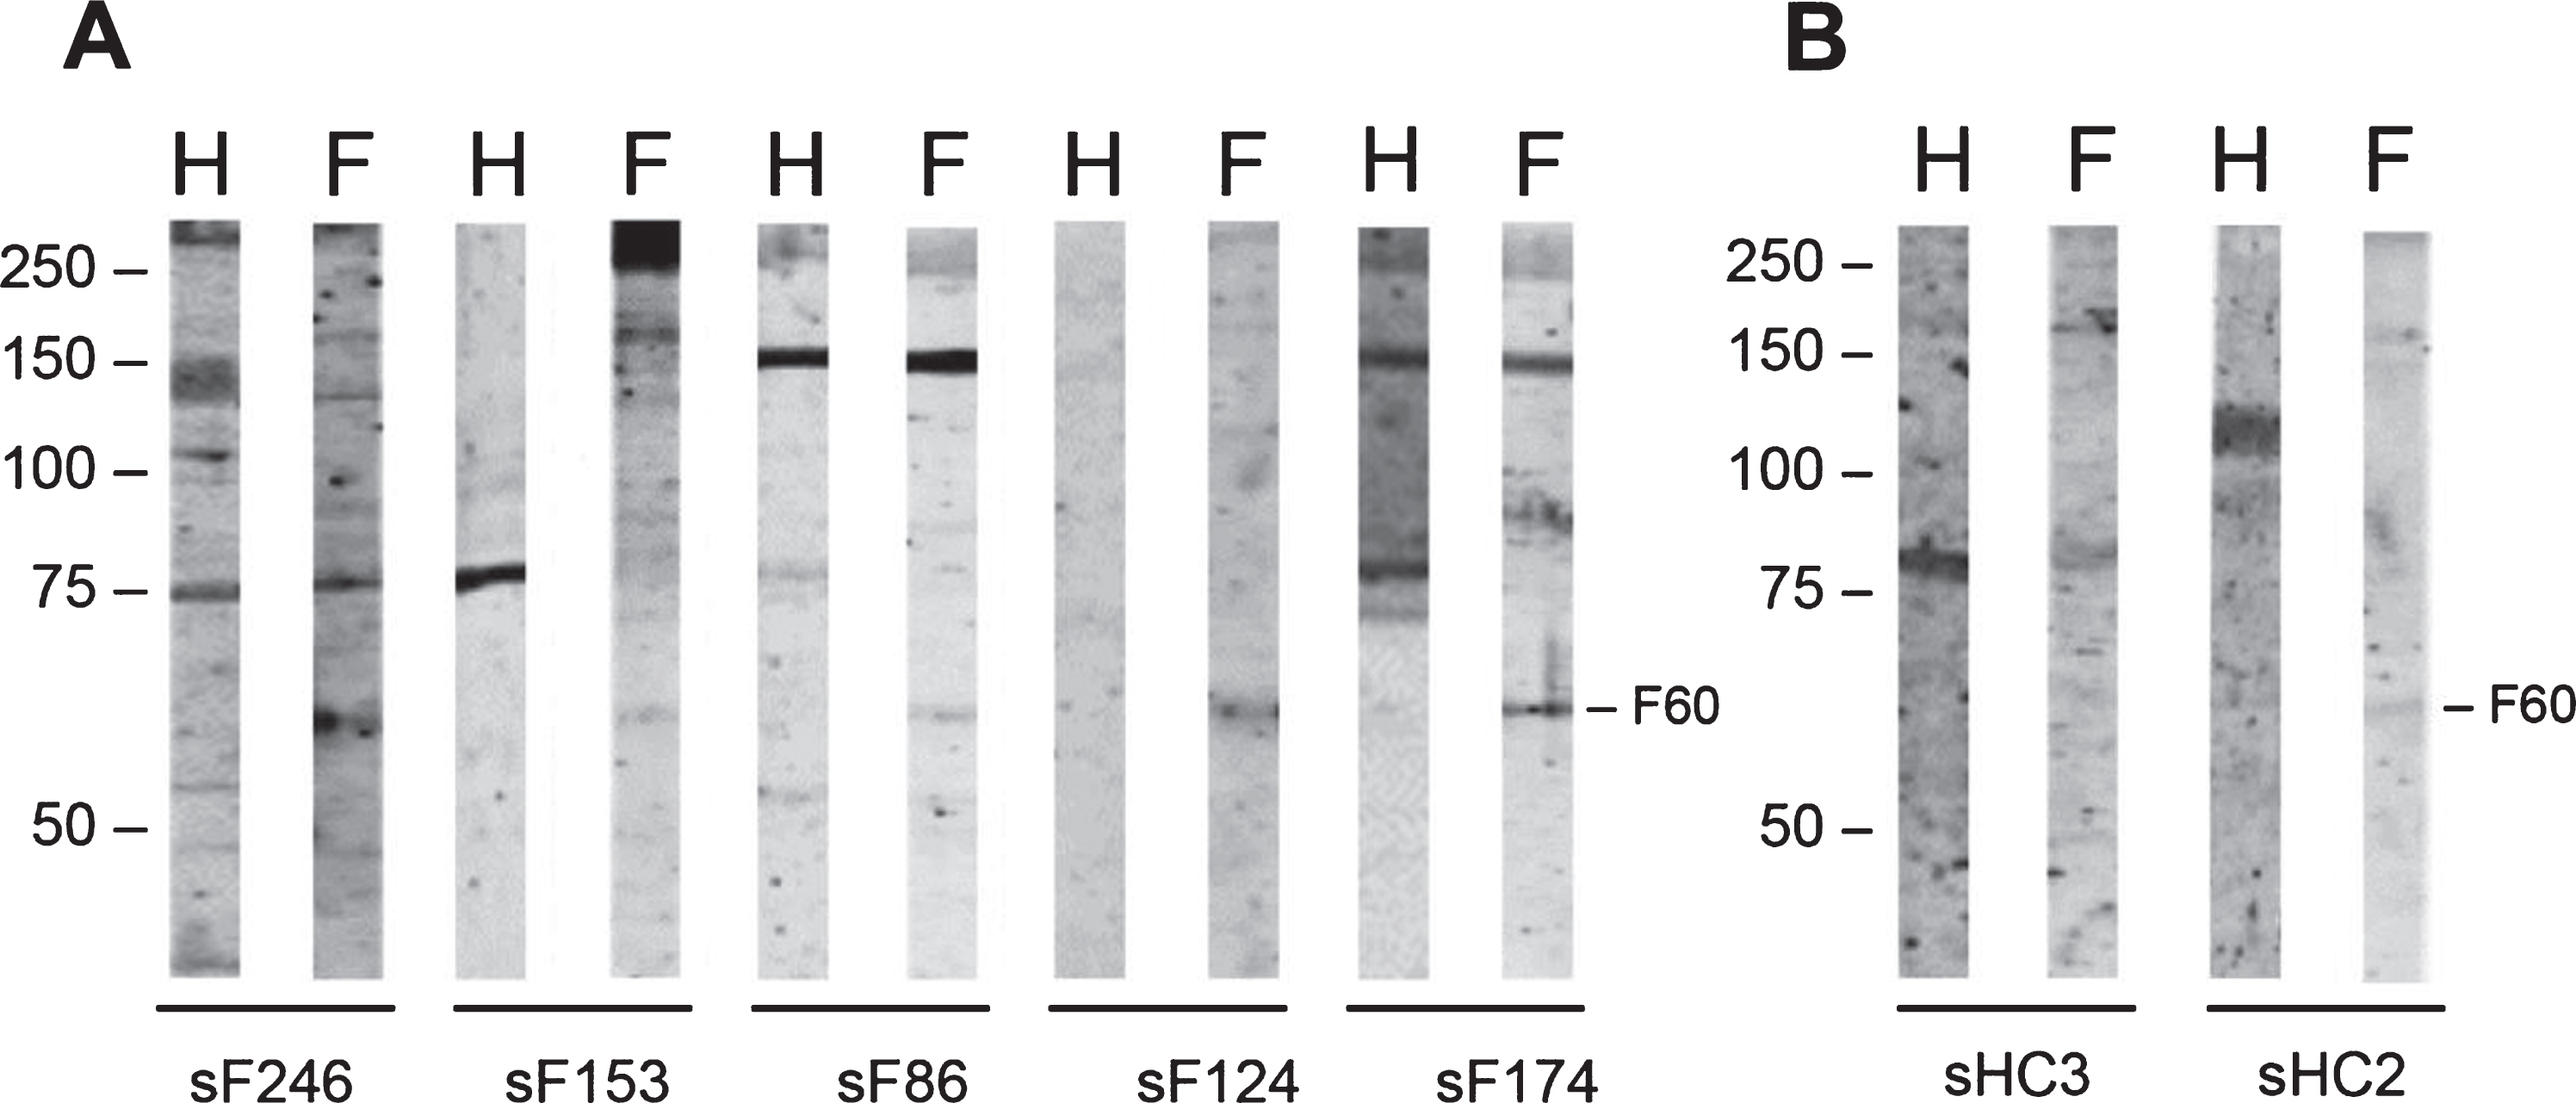 Reactivity of FSHD patient sera and HC sera with FSHD quadriceps muscle protein extract. FSHD muscle lysate (F) and, as a reference an extract from healthy muscles (H), was separated by SDS-PAGE and transferred to nitrocellulose membranes. Blot strips were incubated with 85 FSHD patient sera (sF) (A) and with 3 healthy control sera (sHC) (B). Data for only a few representative samples are shown. The left side of each panel indicates the position of molecular weight markers.